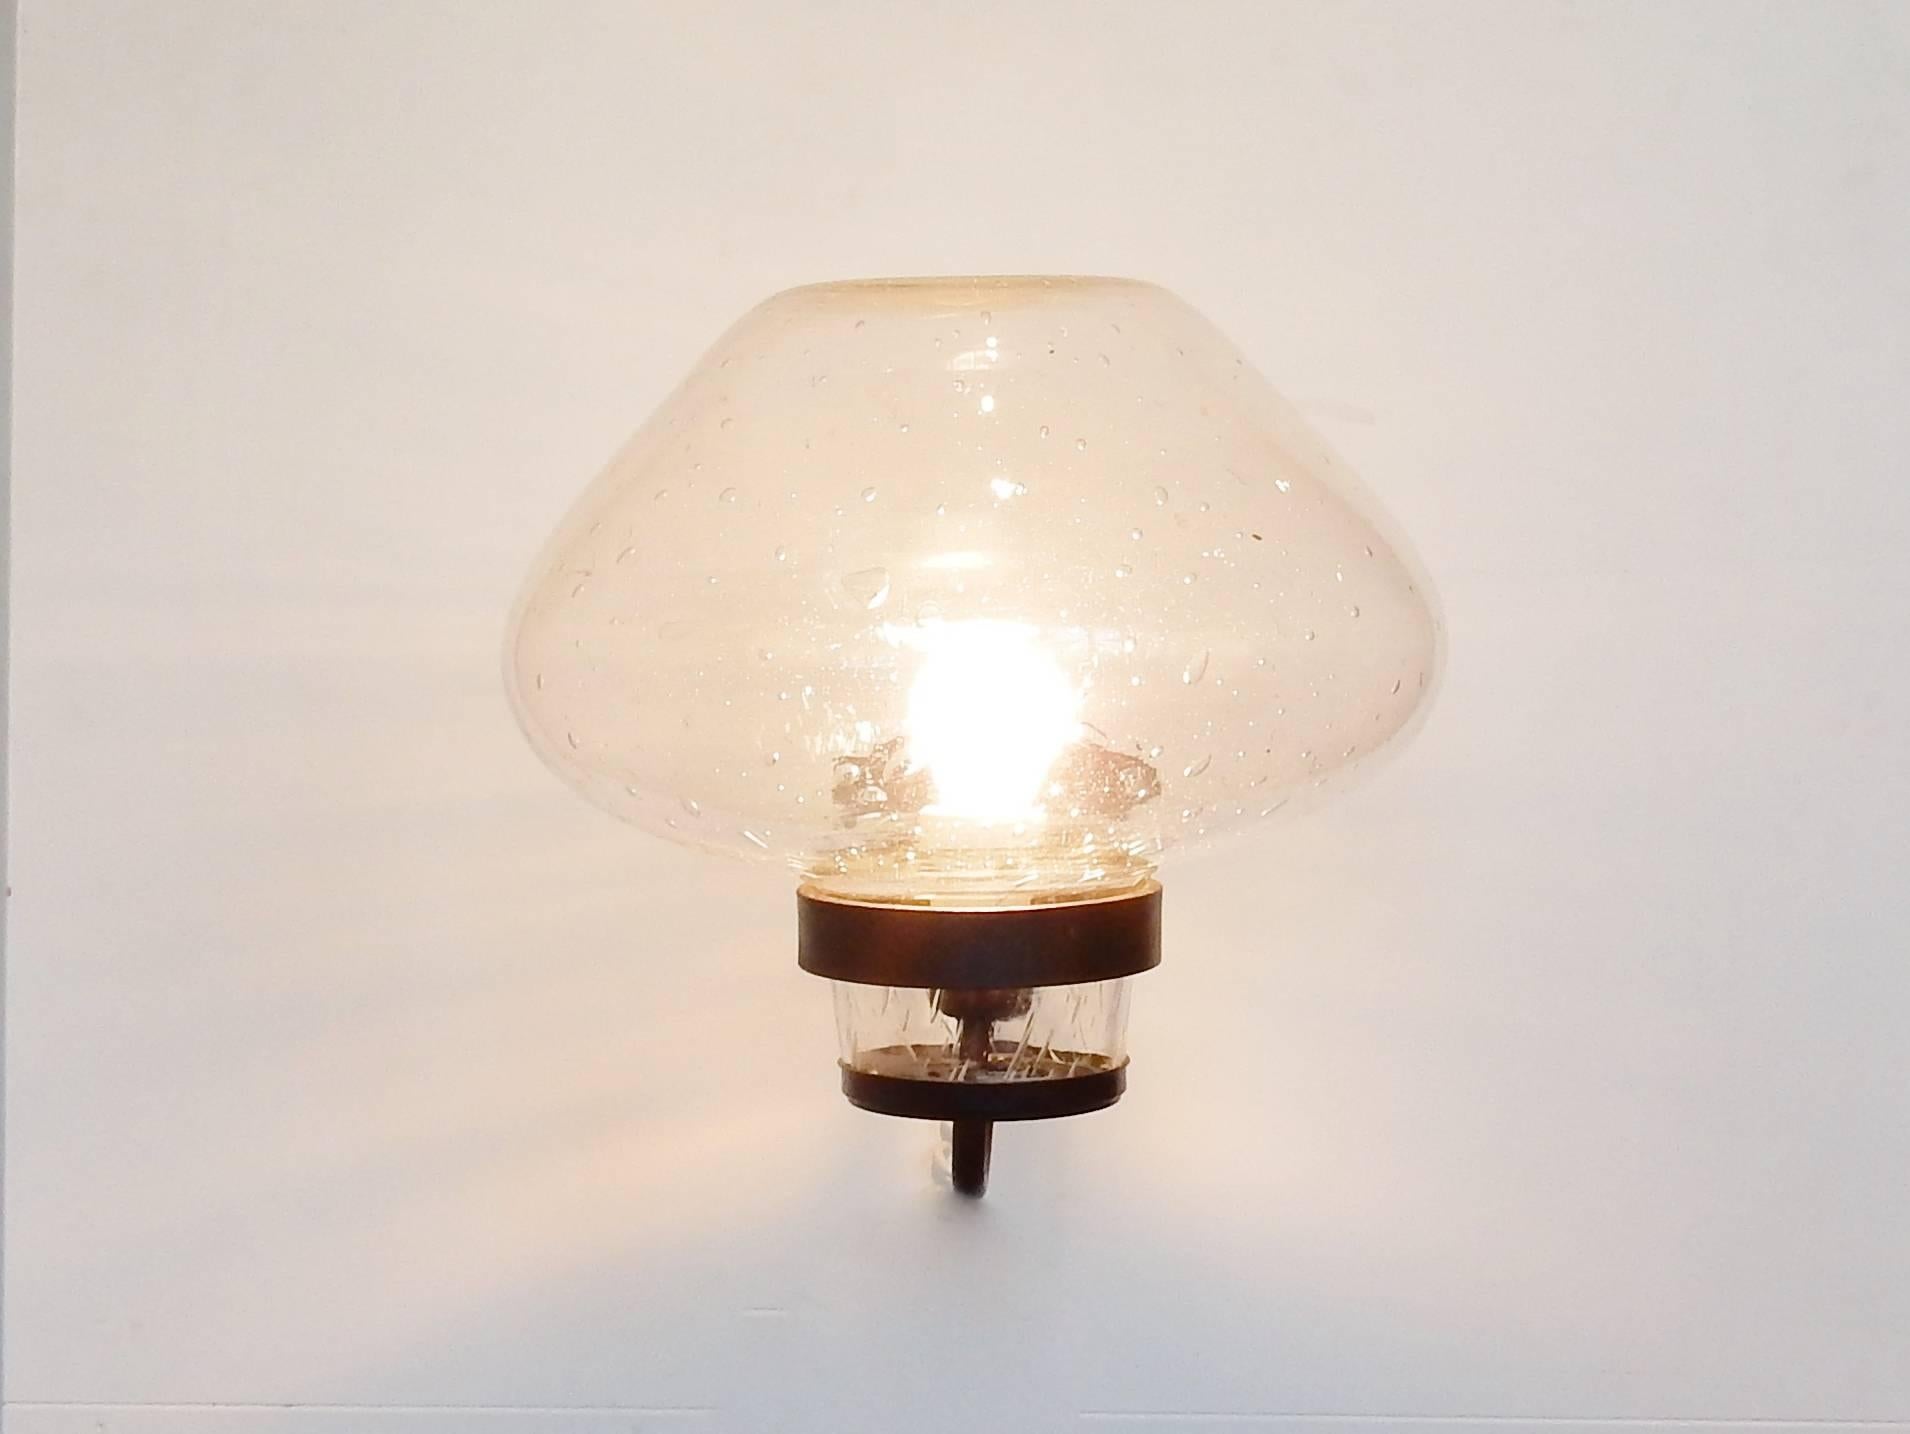 This large size wall lamp is a design by Gunnar Asplund and manufactured by the Swedish company ASEA. A beautiful item in a very good condition. Can be used outside as well as inside. This large size is a very rare size to find of this